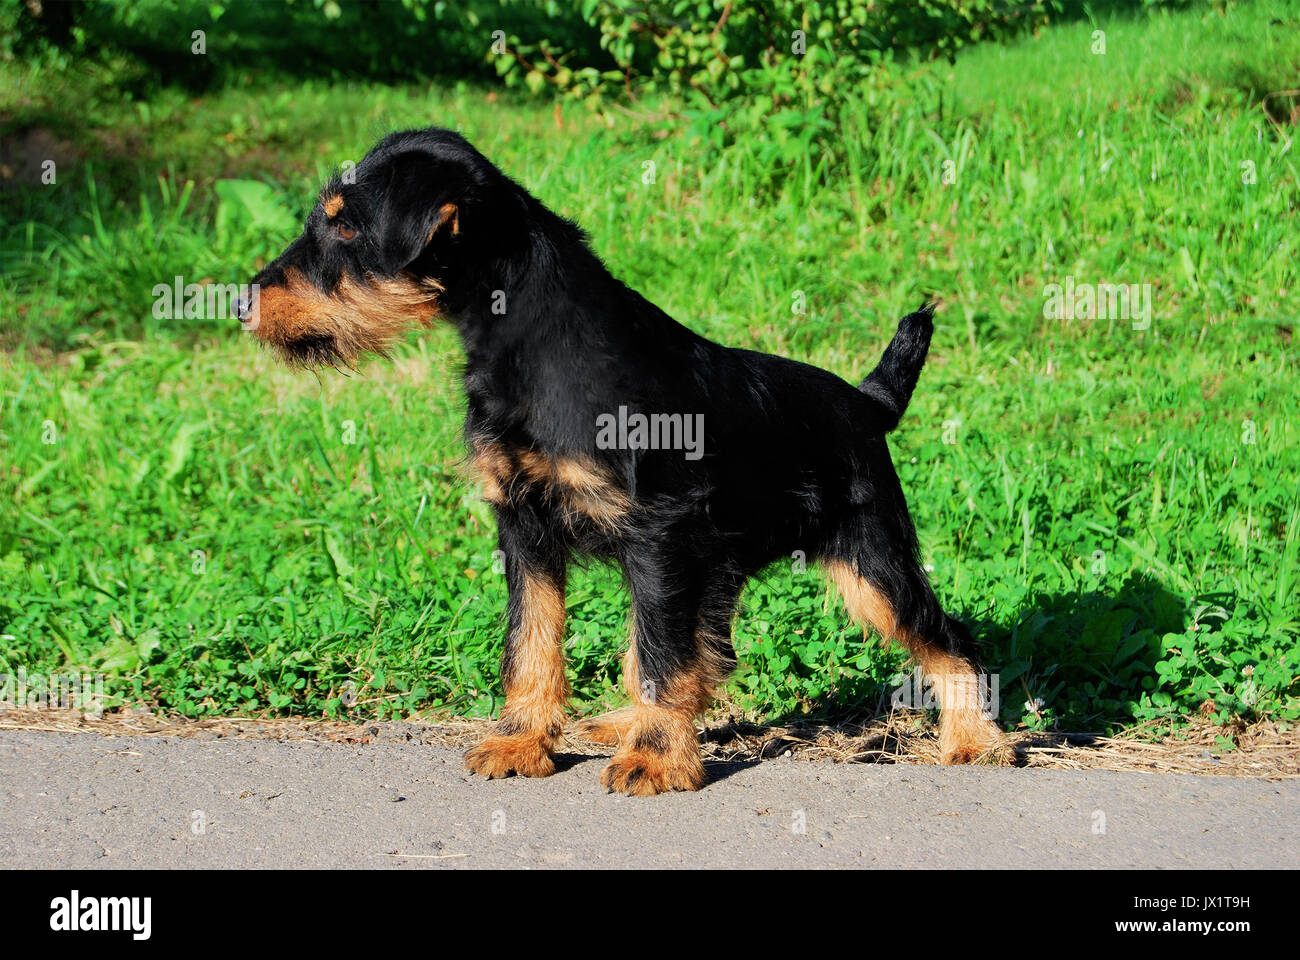 German hunting terrier black and tan, standing on the grass Stock Photo